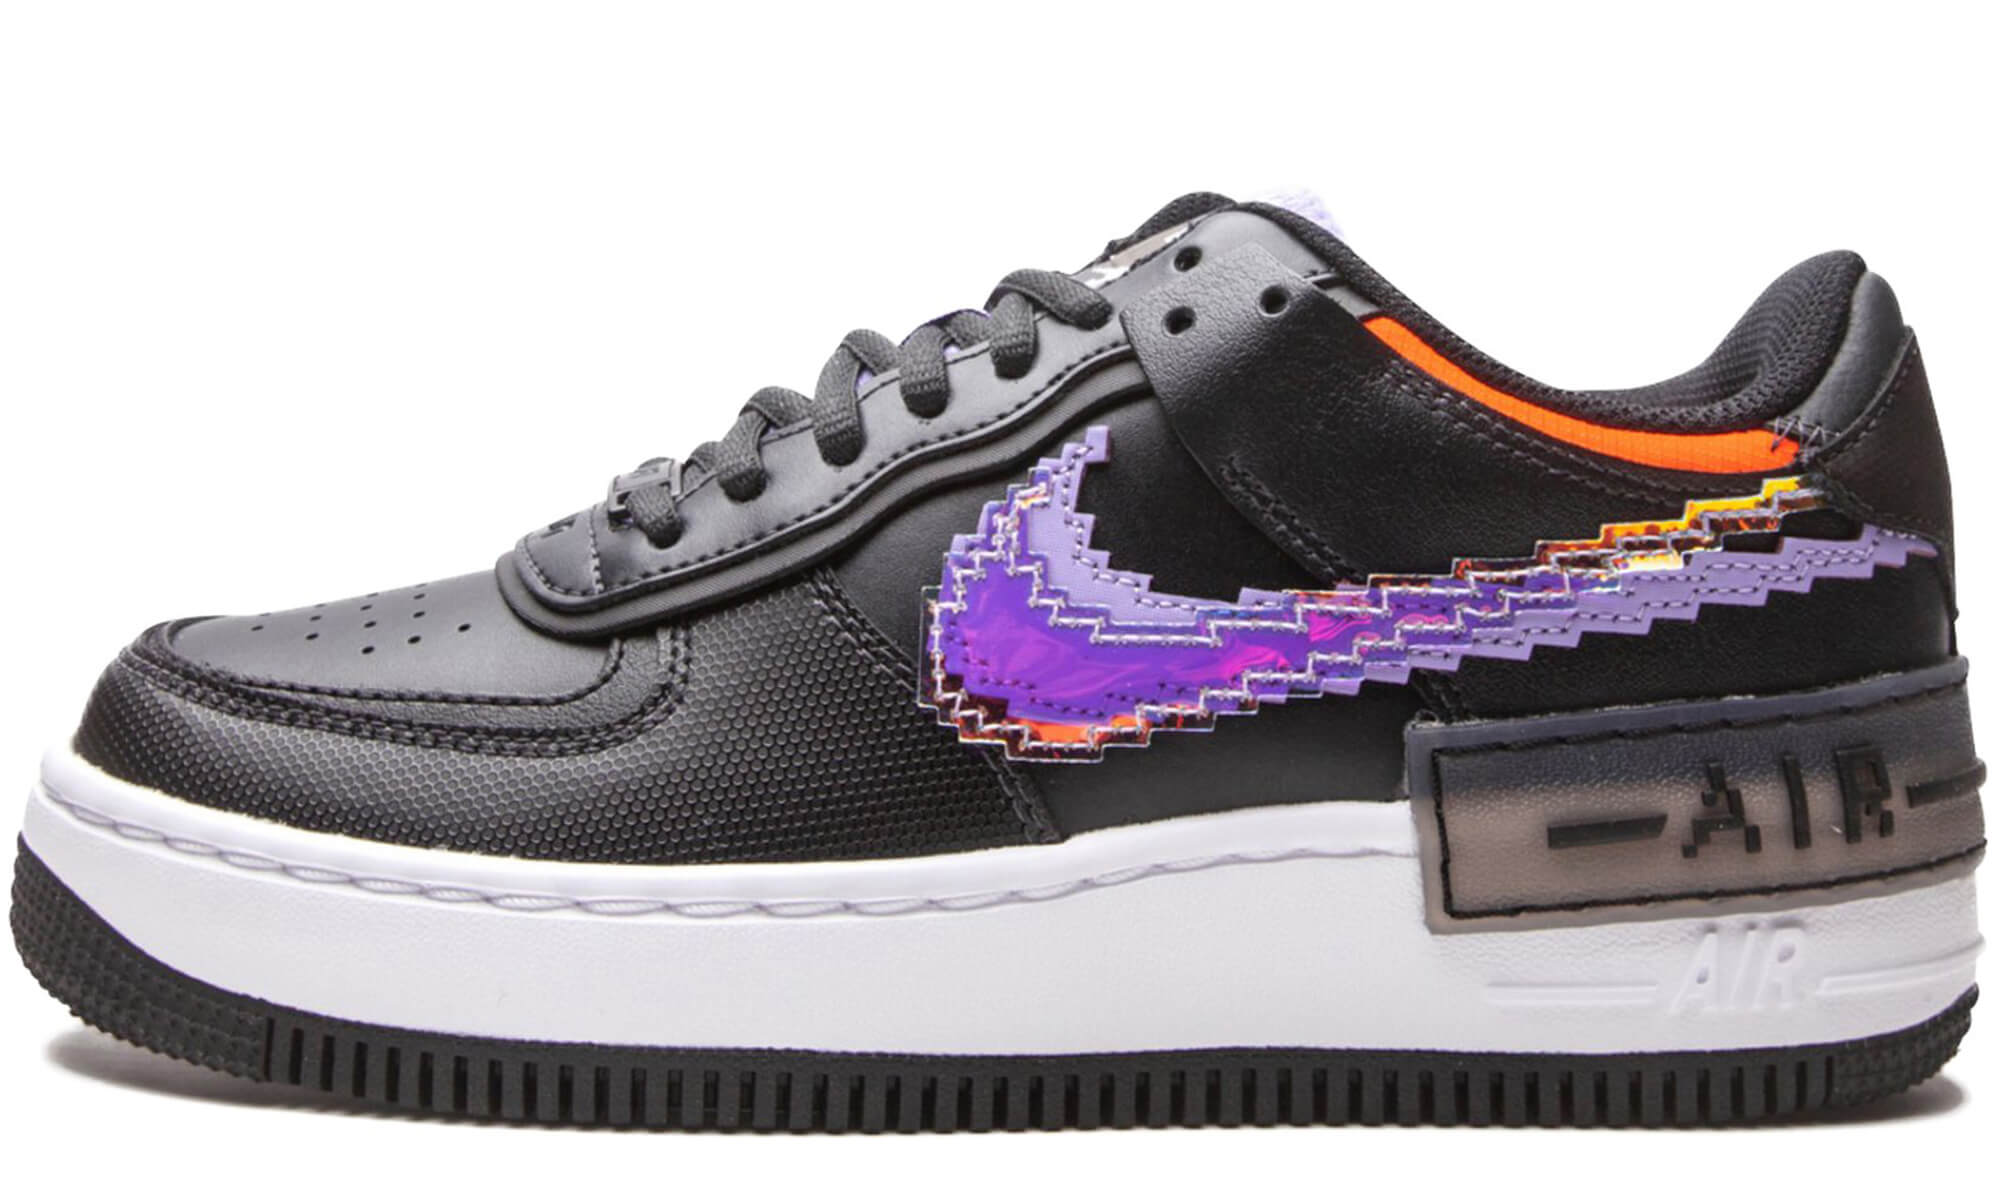 Nike Air Force 1 LV8 GS 'Double Swoosh' Shoes Sneakers - Praise To